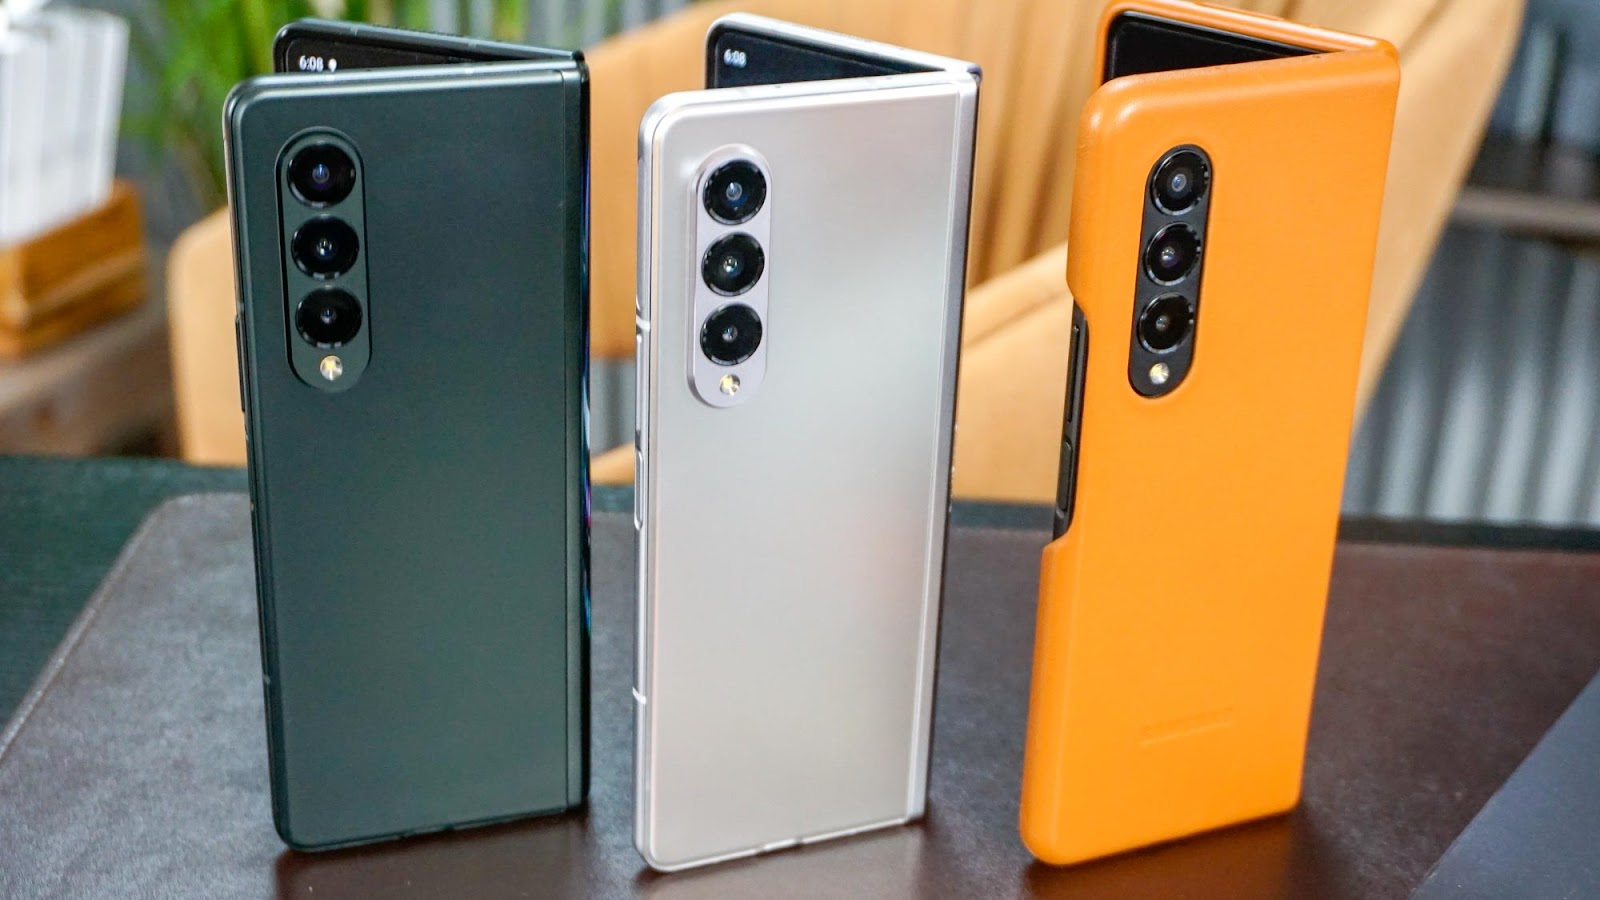 This image shows the Samsung Galaxy Z Fold Phones.